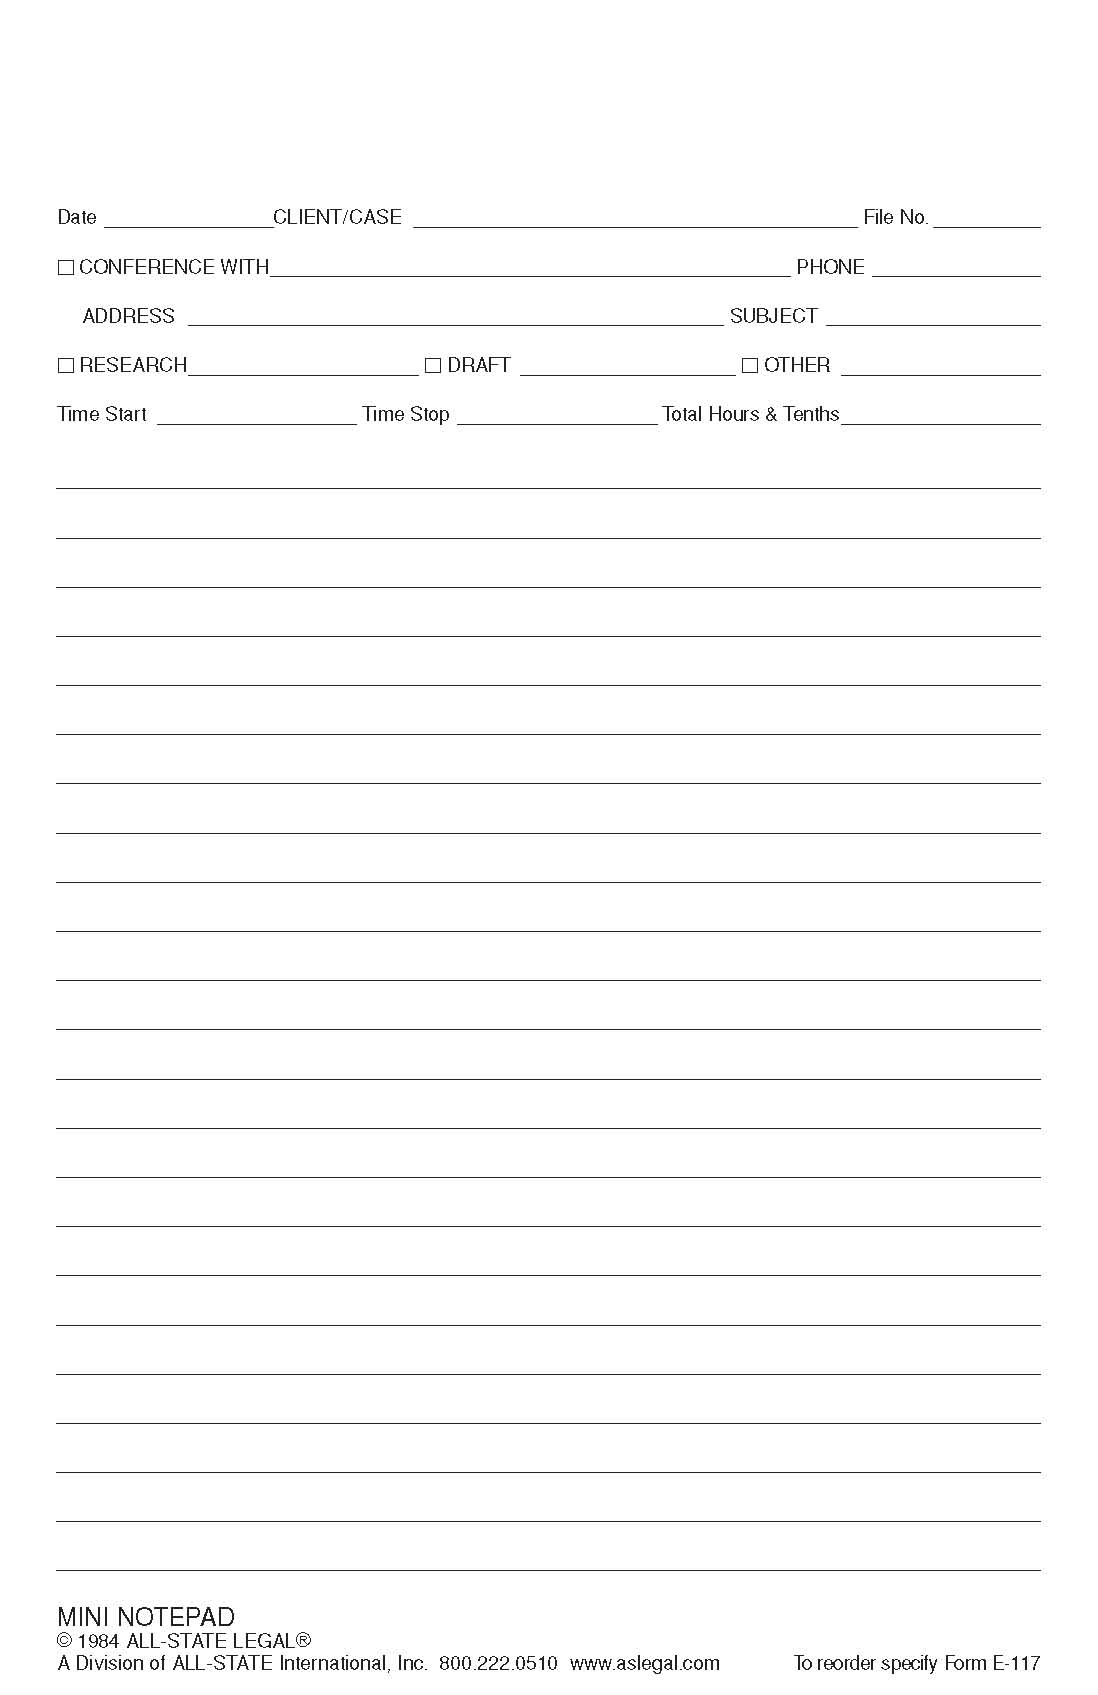 Mini Conference Note Pad 5 1/2" x 8 1/2", Mini Conference Note Pad, 20 lb., White Form with Green Ink, 2 Hole Punched, 50 Sheets/Pad